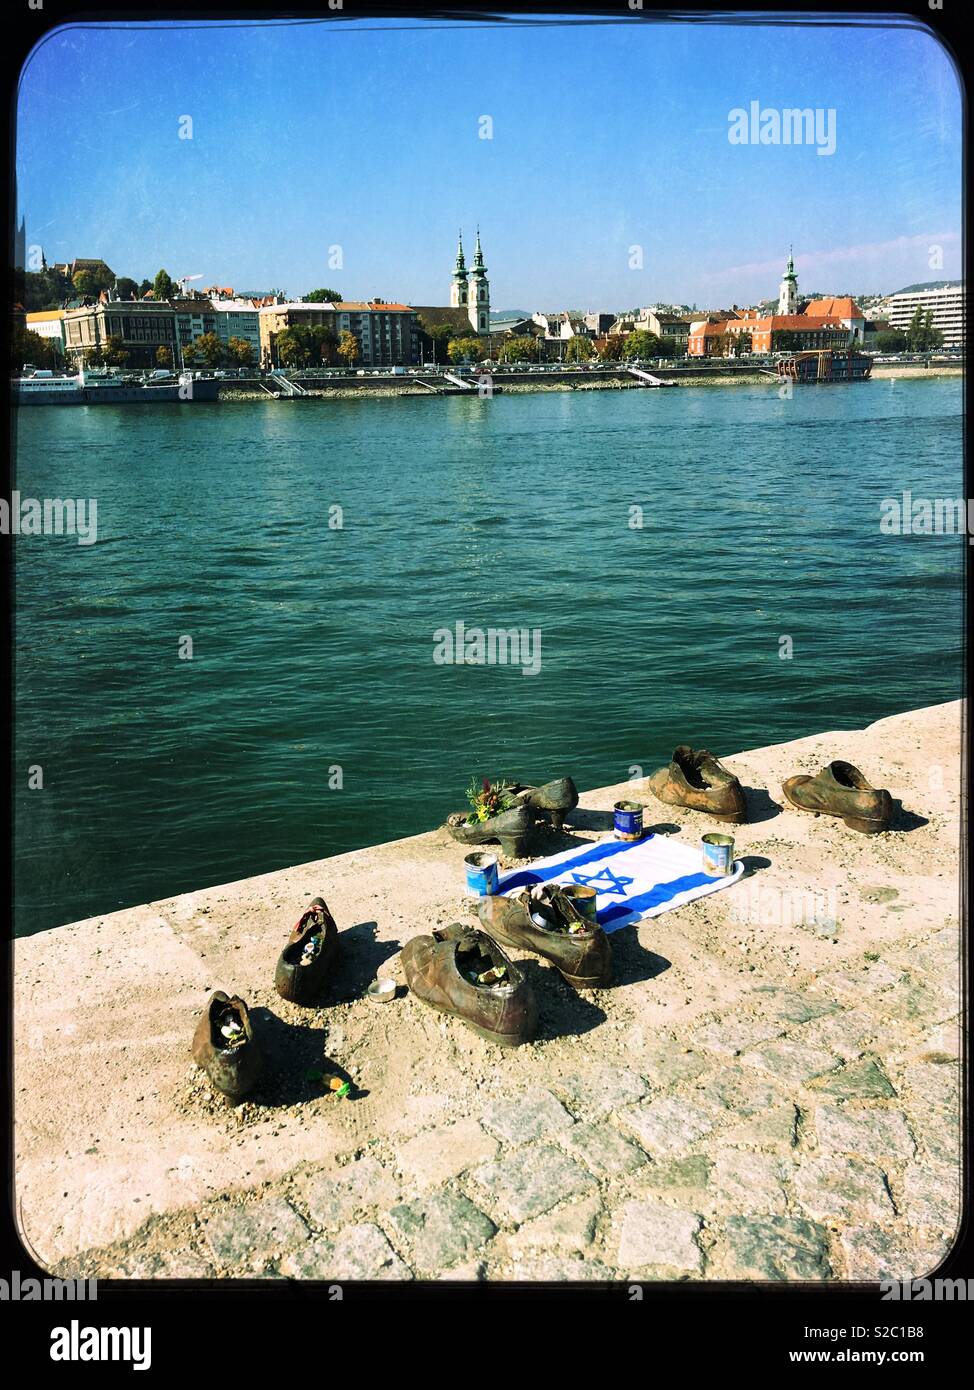 The ‘Shoes on the Danube Bank’, Budapest, Hungary. The trail of iron shoes is a memorial to Jews shot here by Arrow Cross militiamen in WW2. Stock Photo